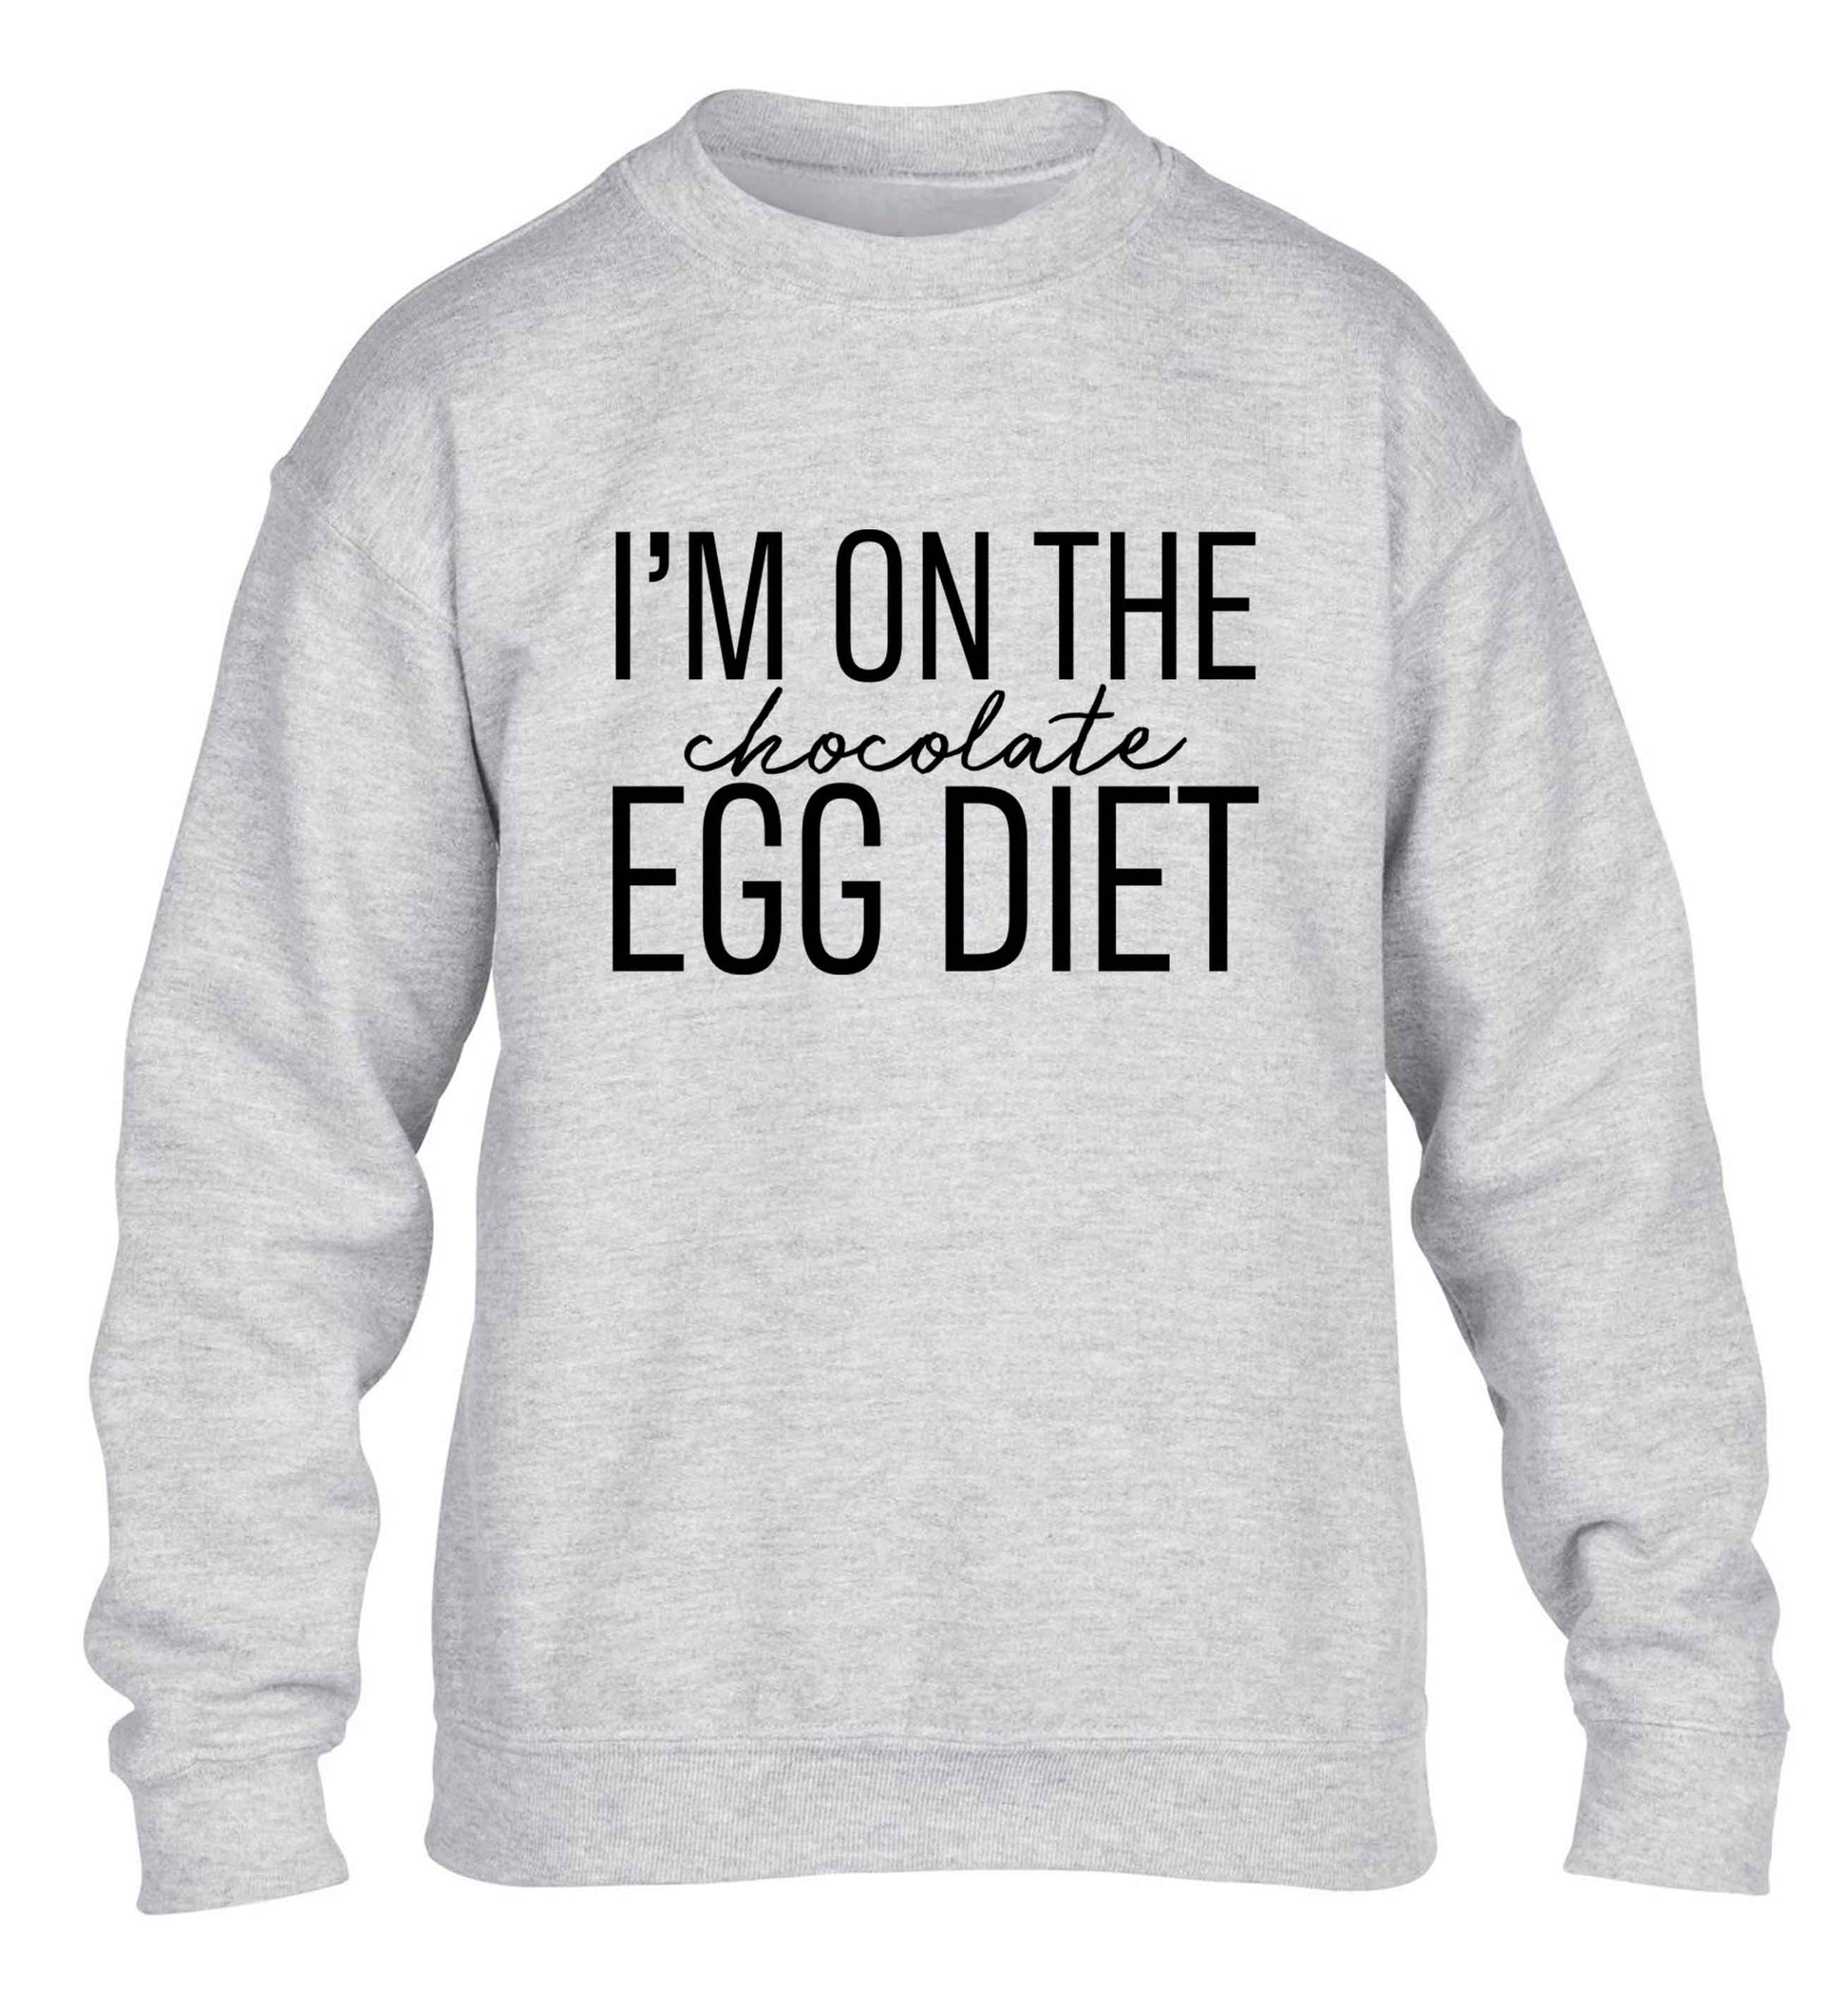 I'm on the chocolate egg diet children's grey sweater 12-13 Years